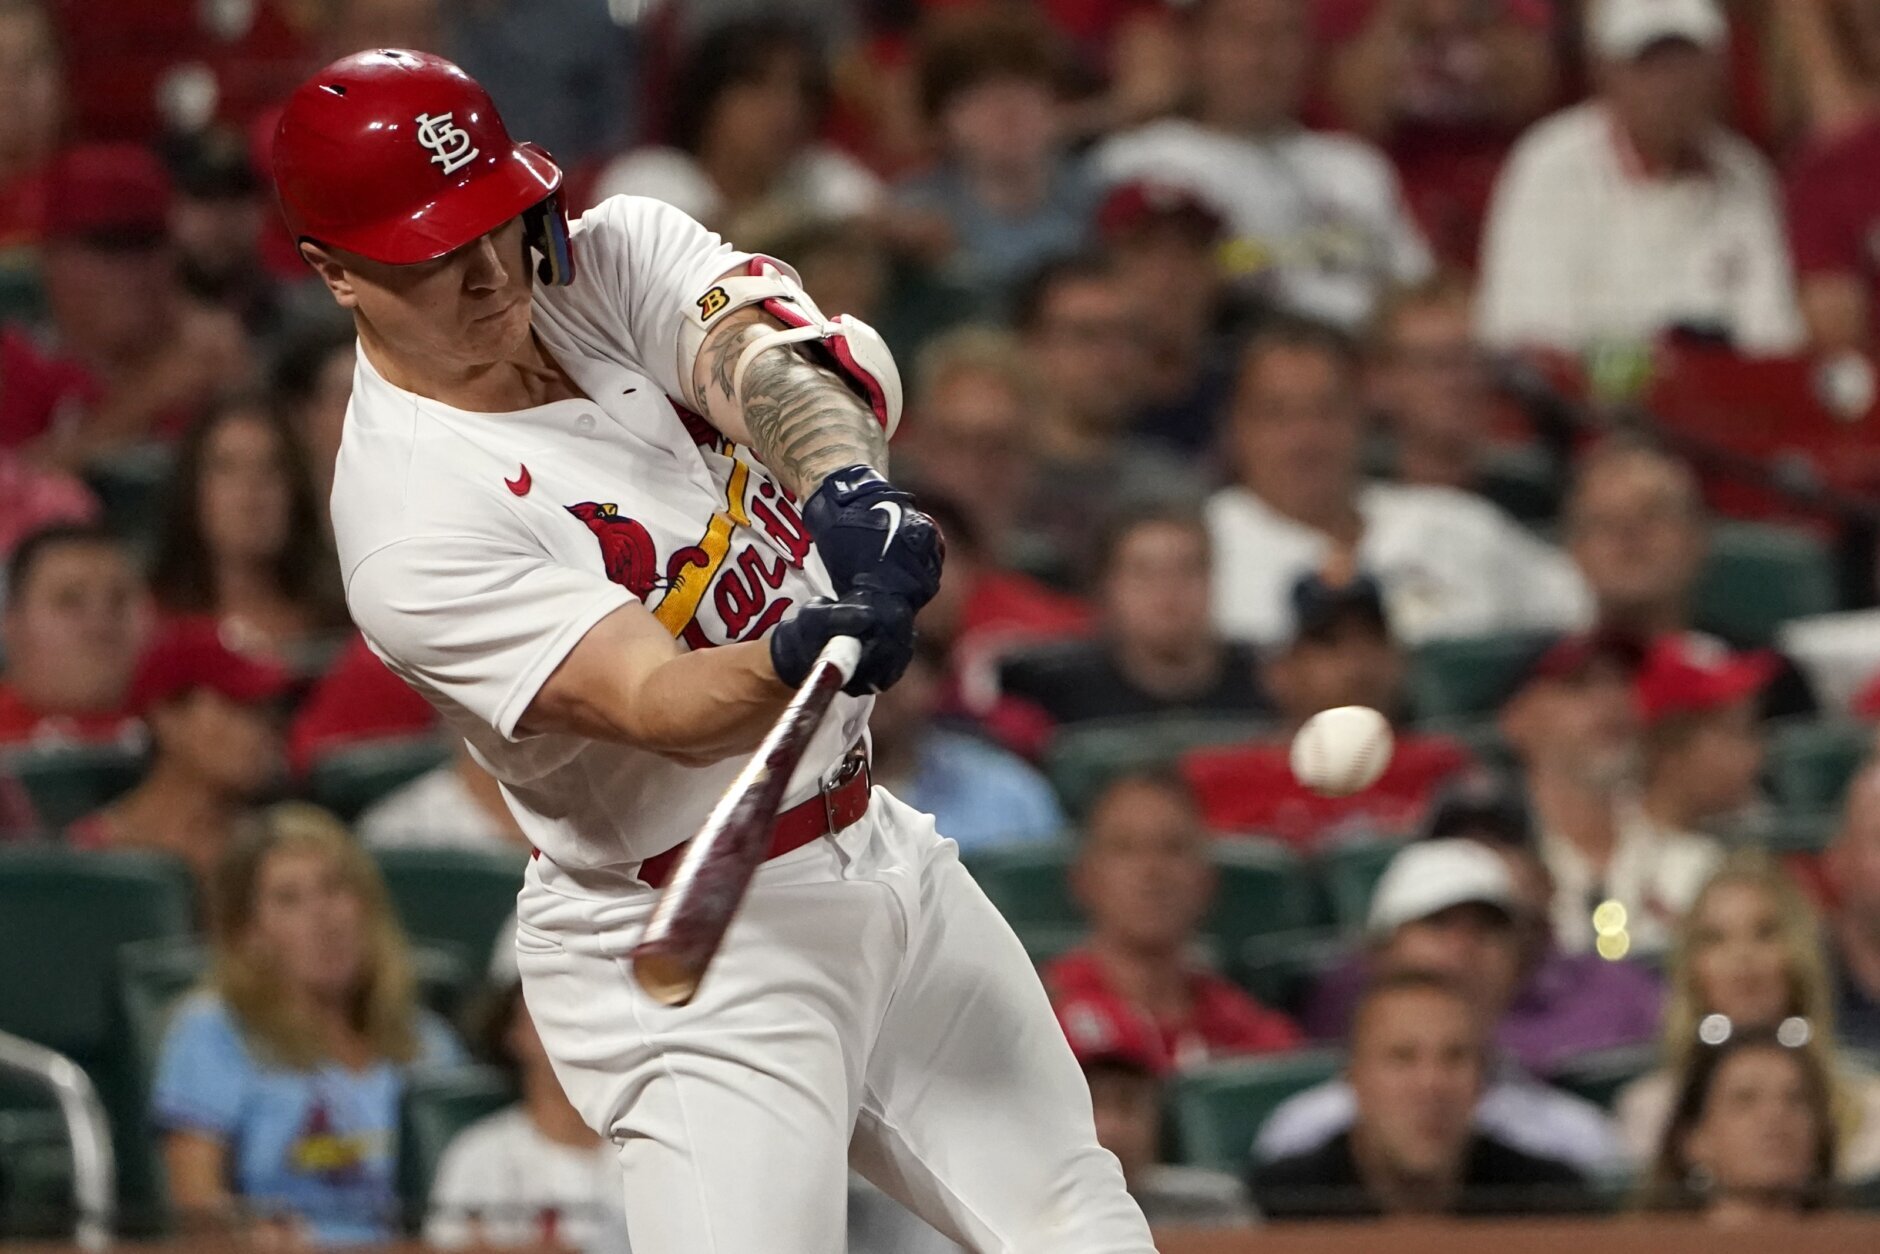 St. Louis Cardinals shake up the minor leagues, Gorman and Walker continue  to Develop